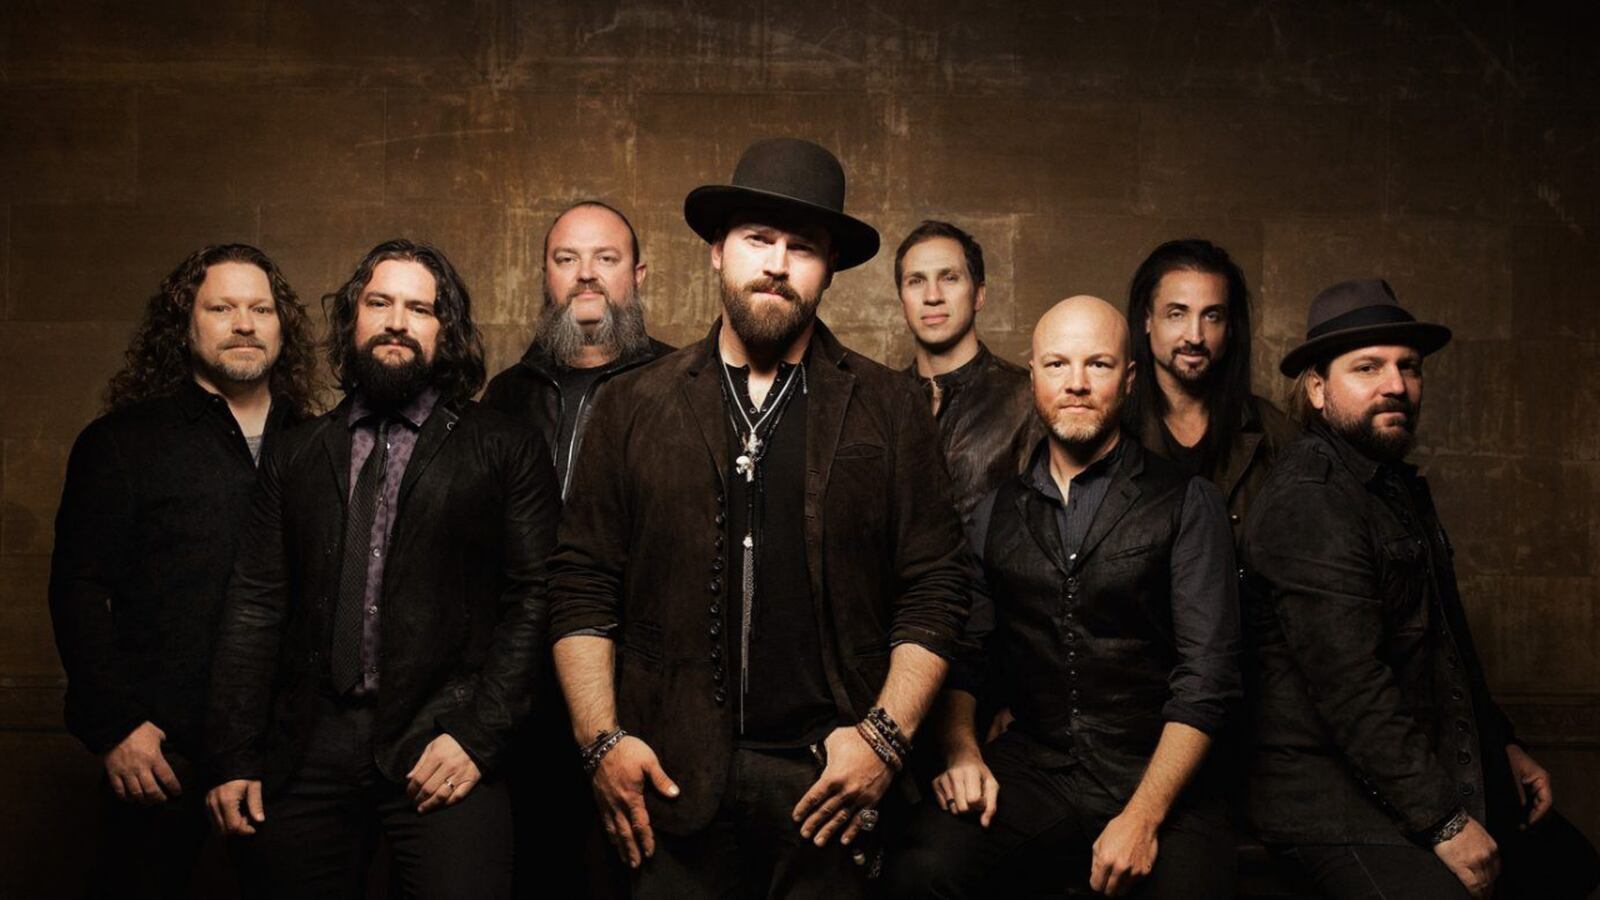 Zac Brown Band announces “From the Fire Tour” coming to Fenway Park